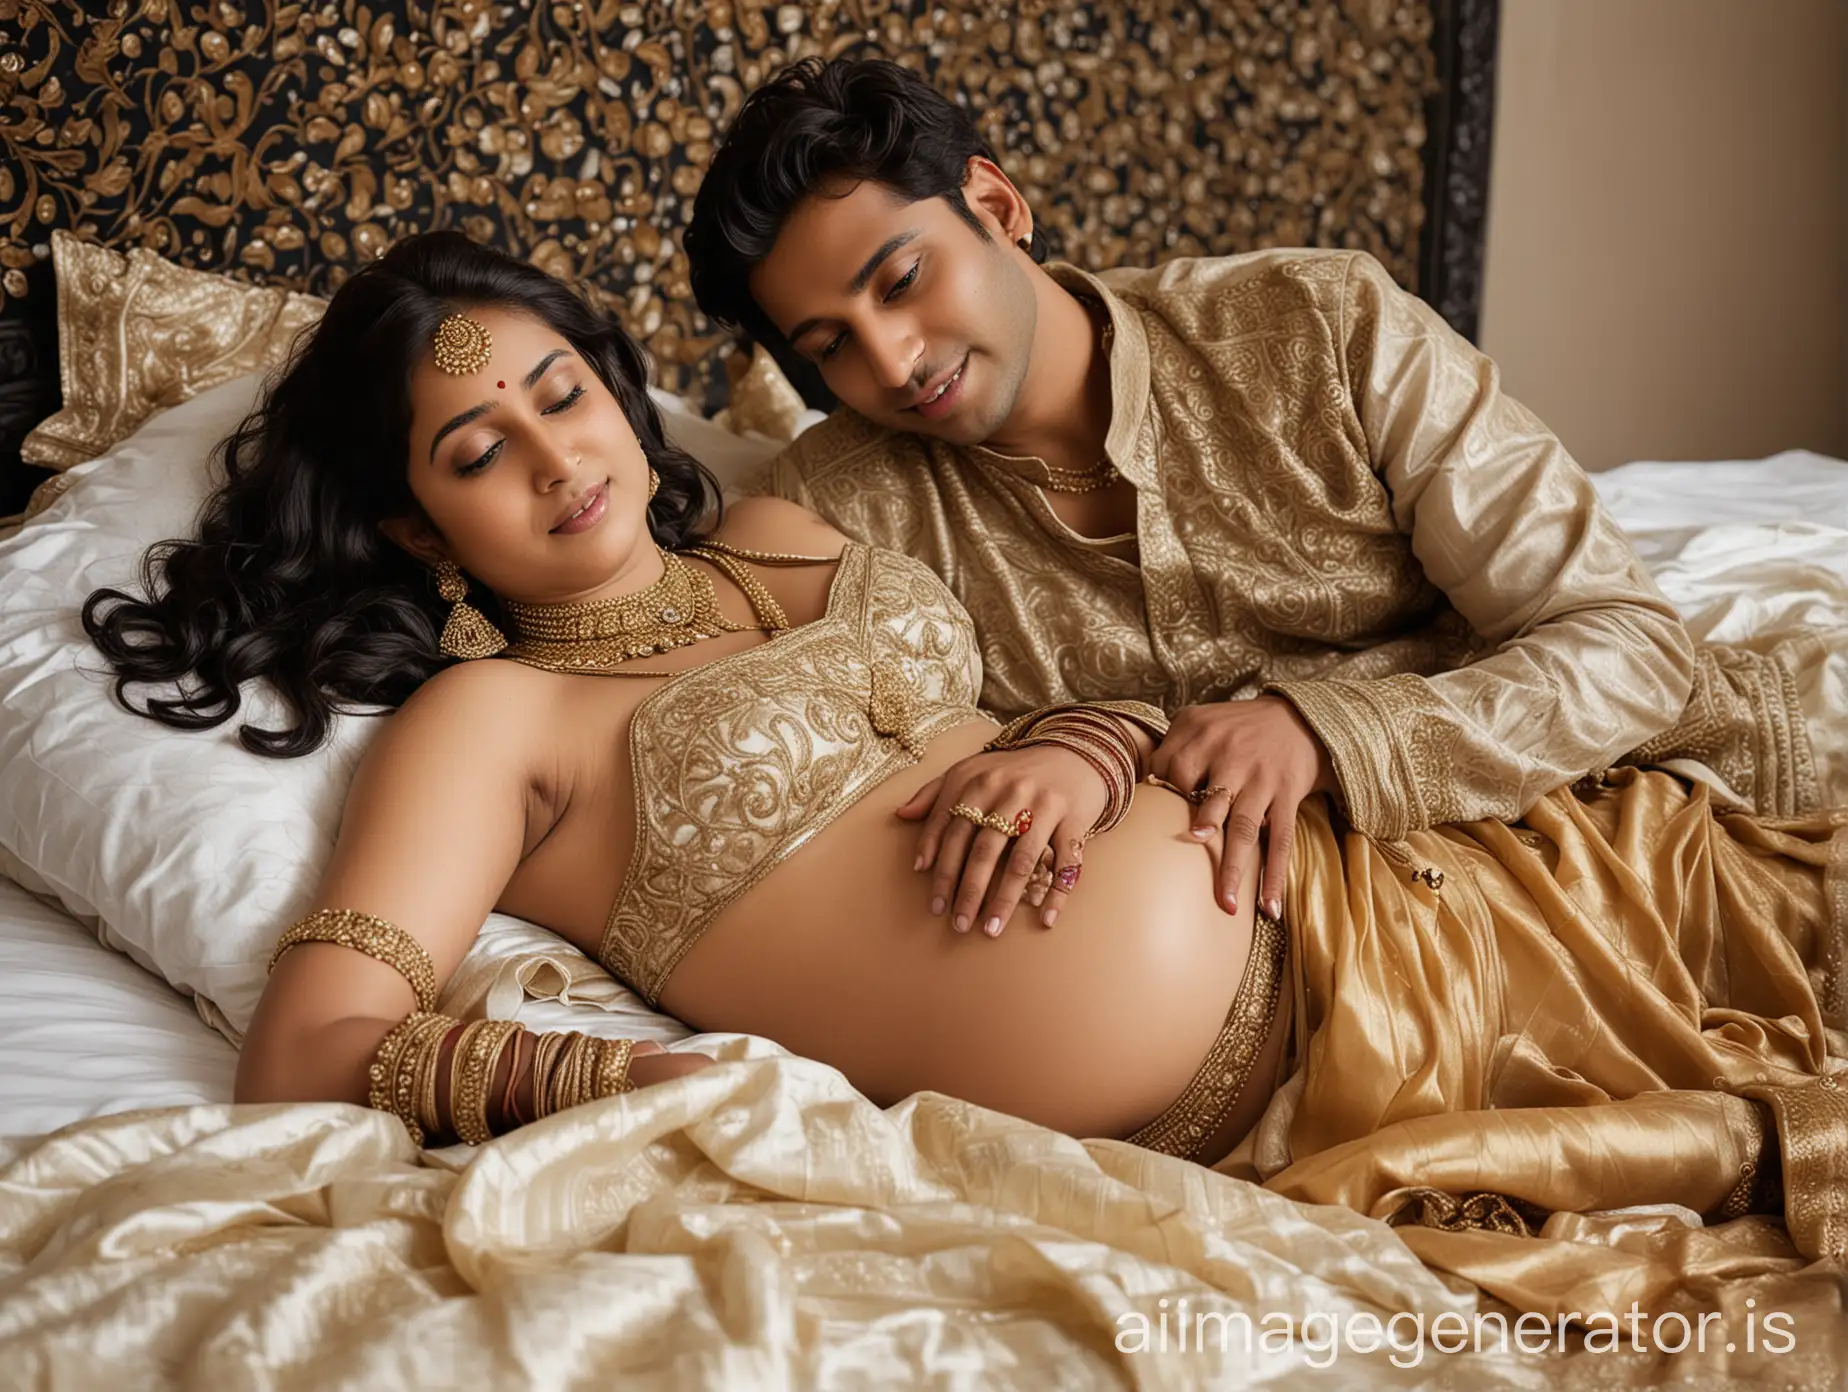 Nude-Indian-Woman-with-Boyfriend-in-Saree-Romantic-Maternity-Portrait-on-Black-Bed